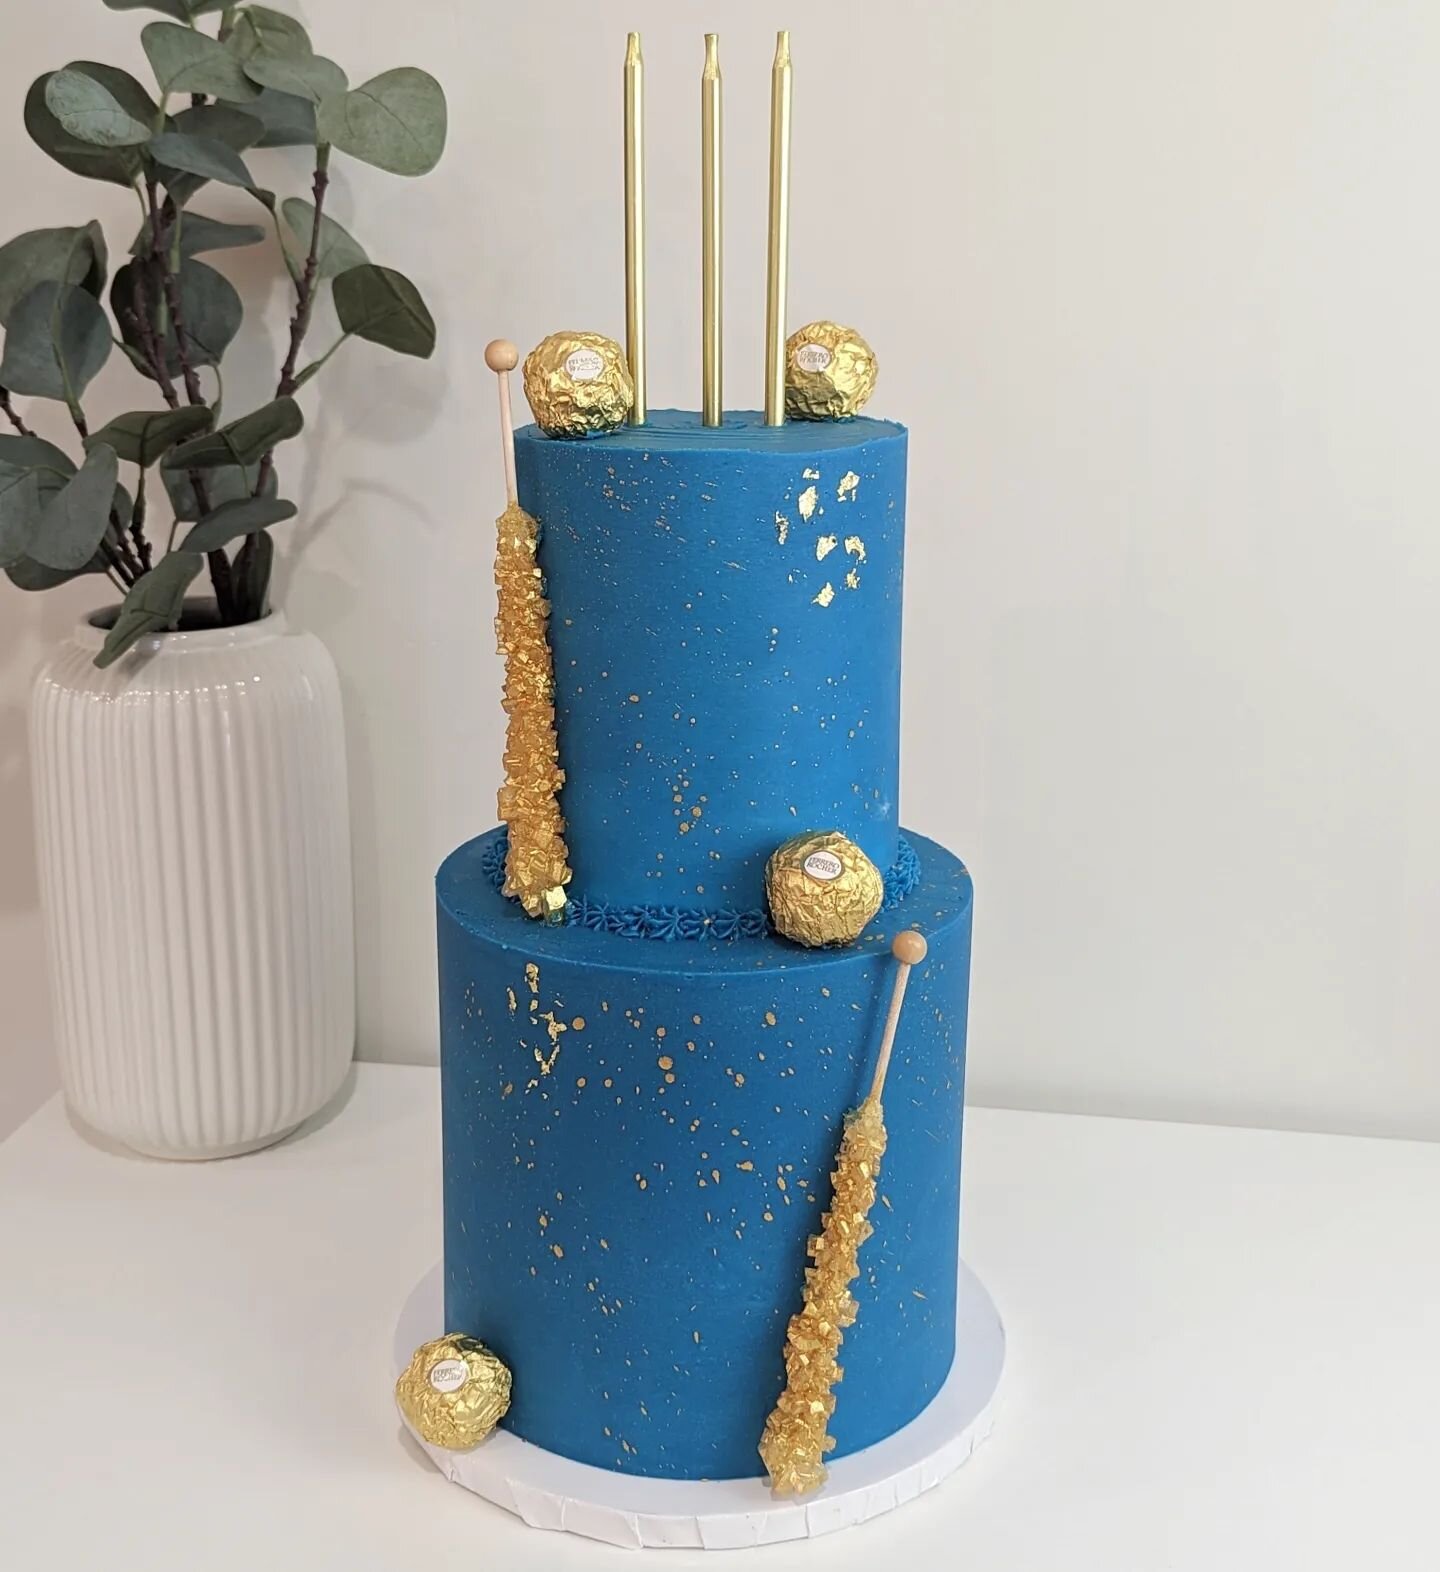 Chocolate cake, blue frosting and 3 candles on top! Custom ordered by my baby nephew, Zain! Happiest birthday to my little sweetheart 😘💙😘
.
.
.
.
#custommade #nephew #proudauntie #customcake #tieredcake #gold #bluecake #buttercreamcakes #buttercre